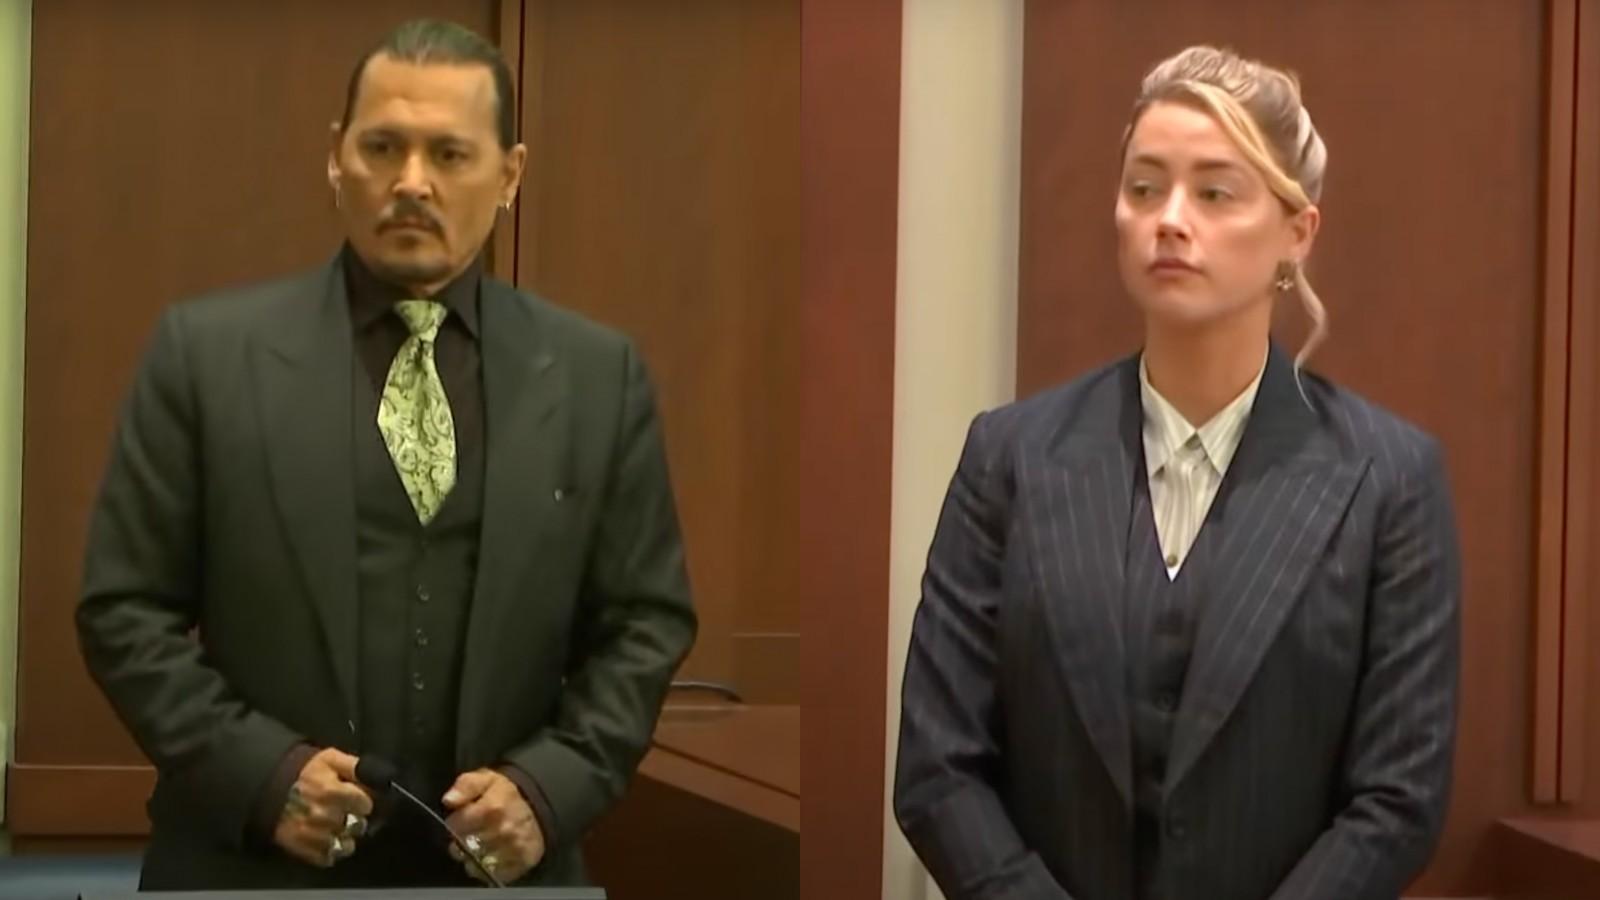 Johnny Depp and Amber Heard taking the stand at their 2022 defamation trial